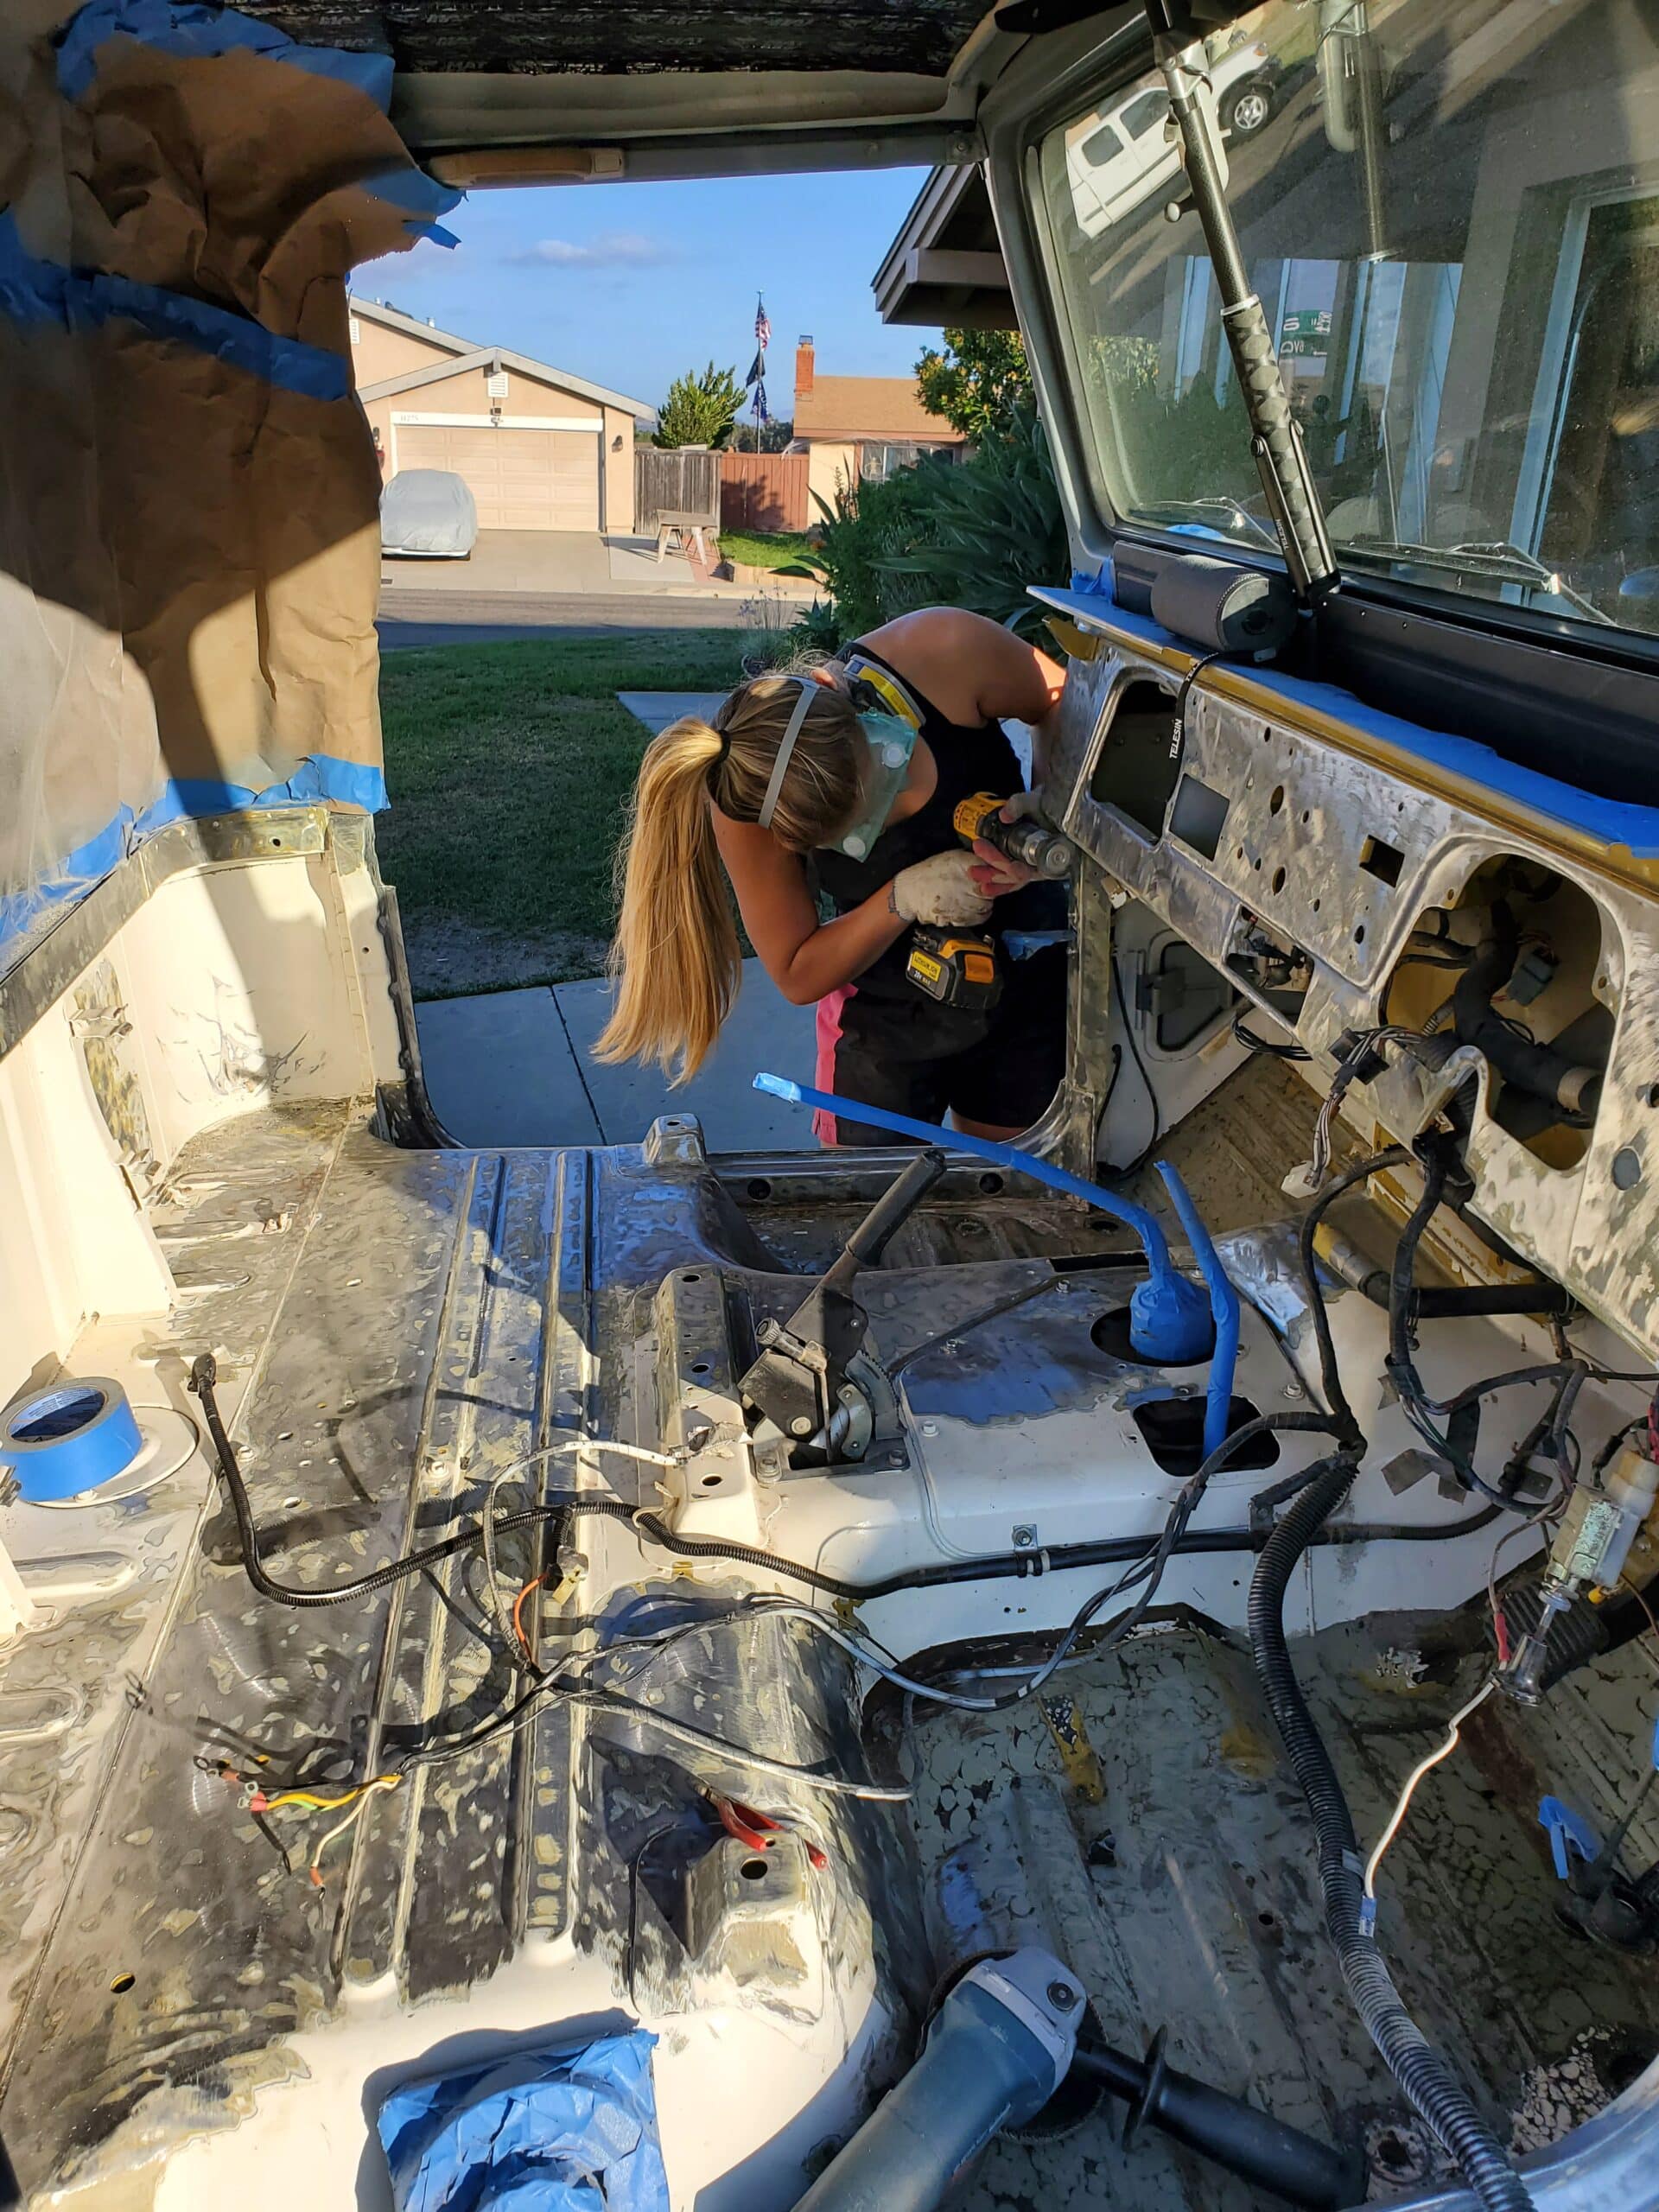 Lauren drilling something into the Land Cruiser during renovation